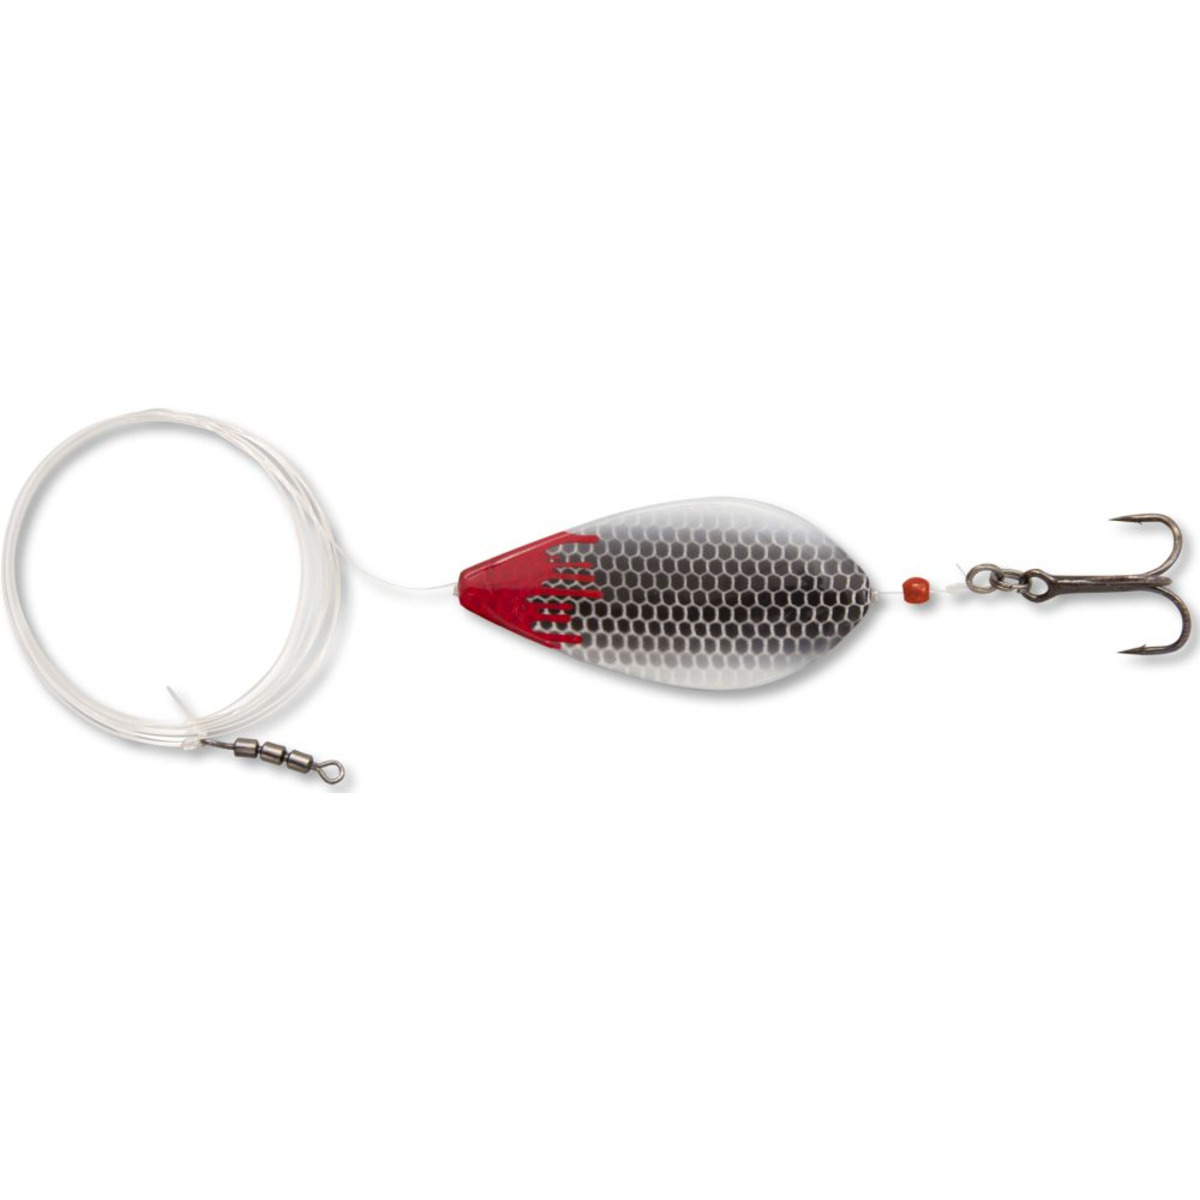 Magic Trout Fat Bloody Inliner - black/white